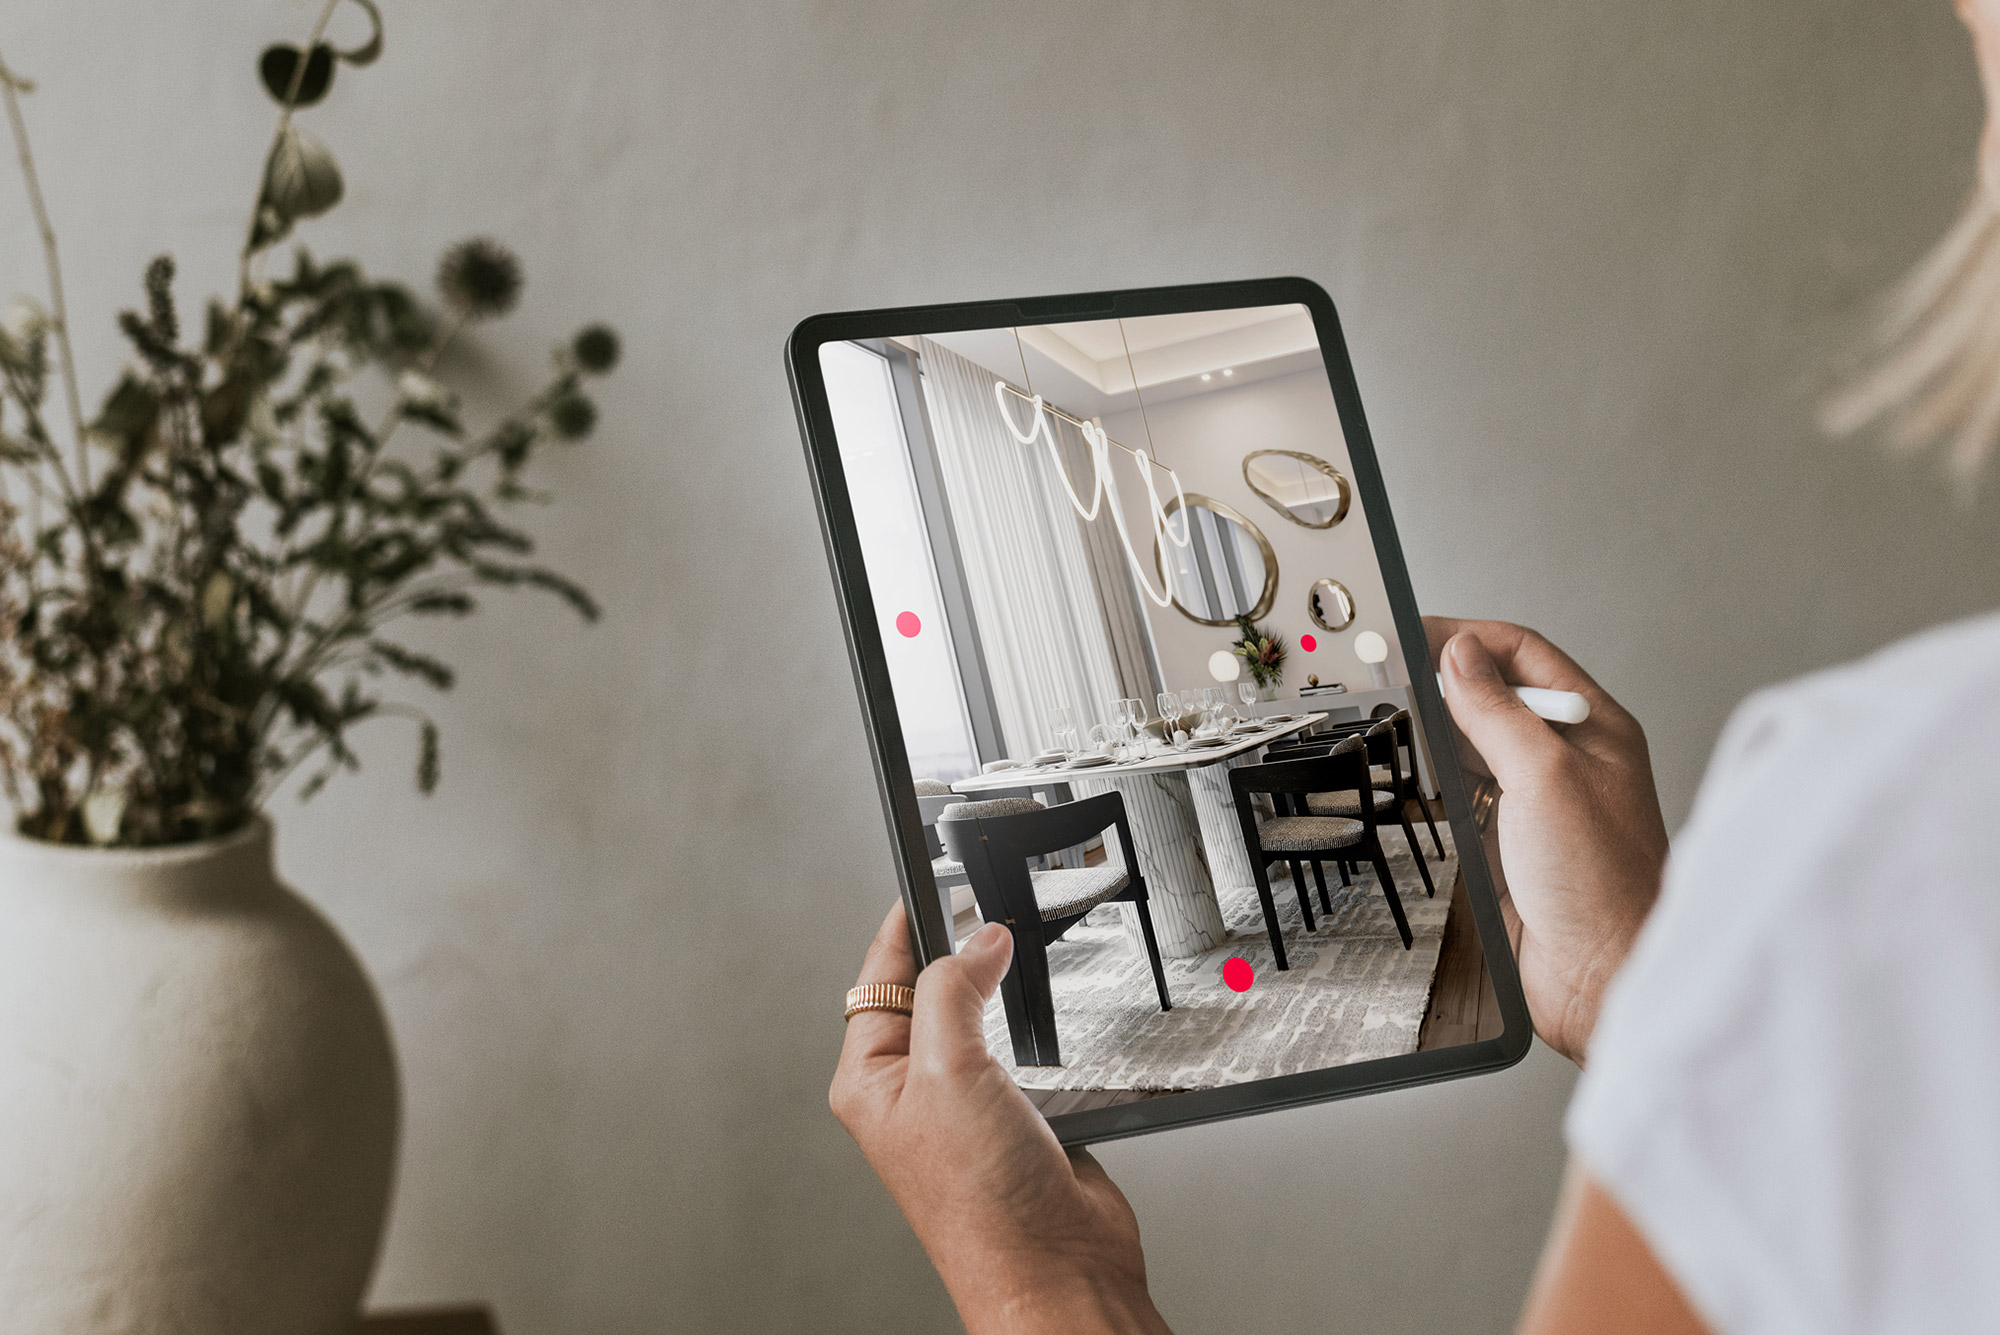 Off-Plans 360 Virtual Tours: How It Can Help To Market Pre-Built Properties